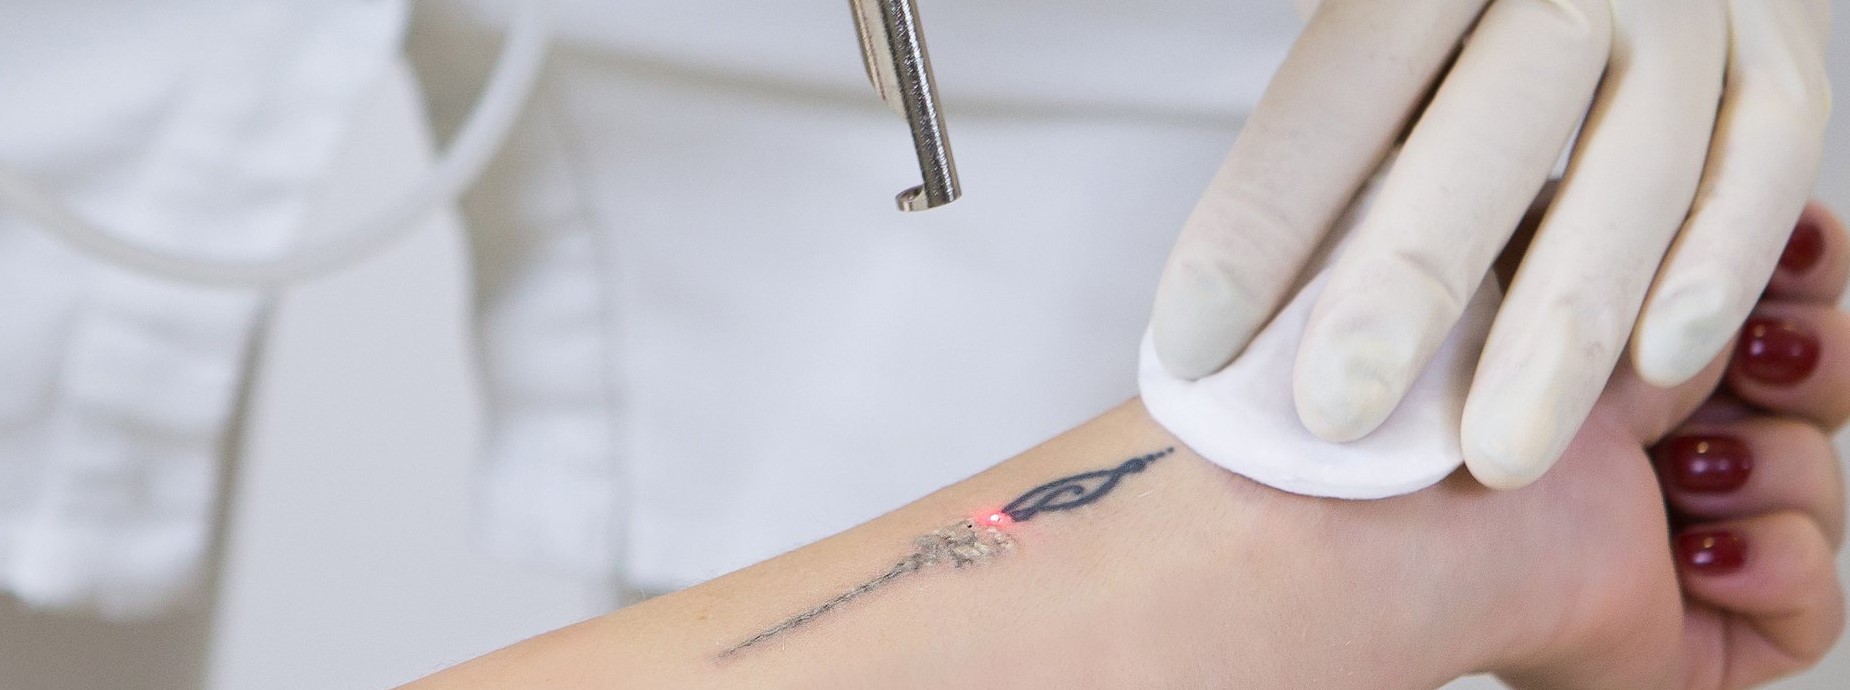 tattoo arm how to remove